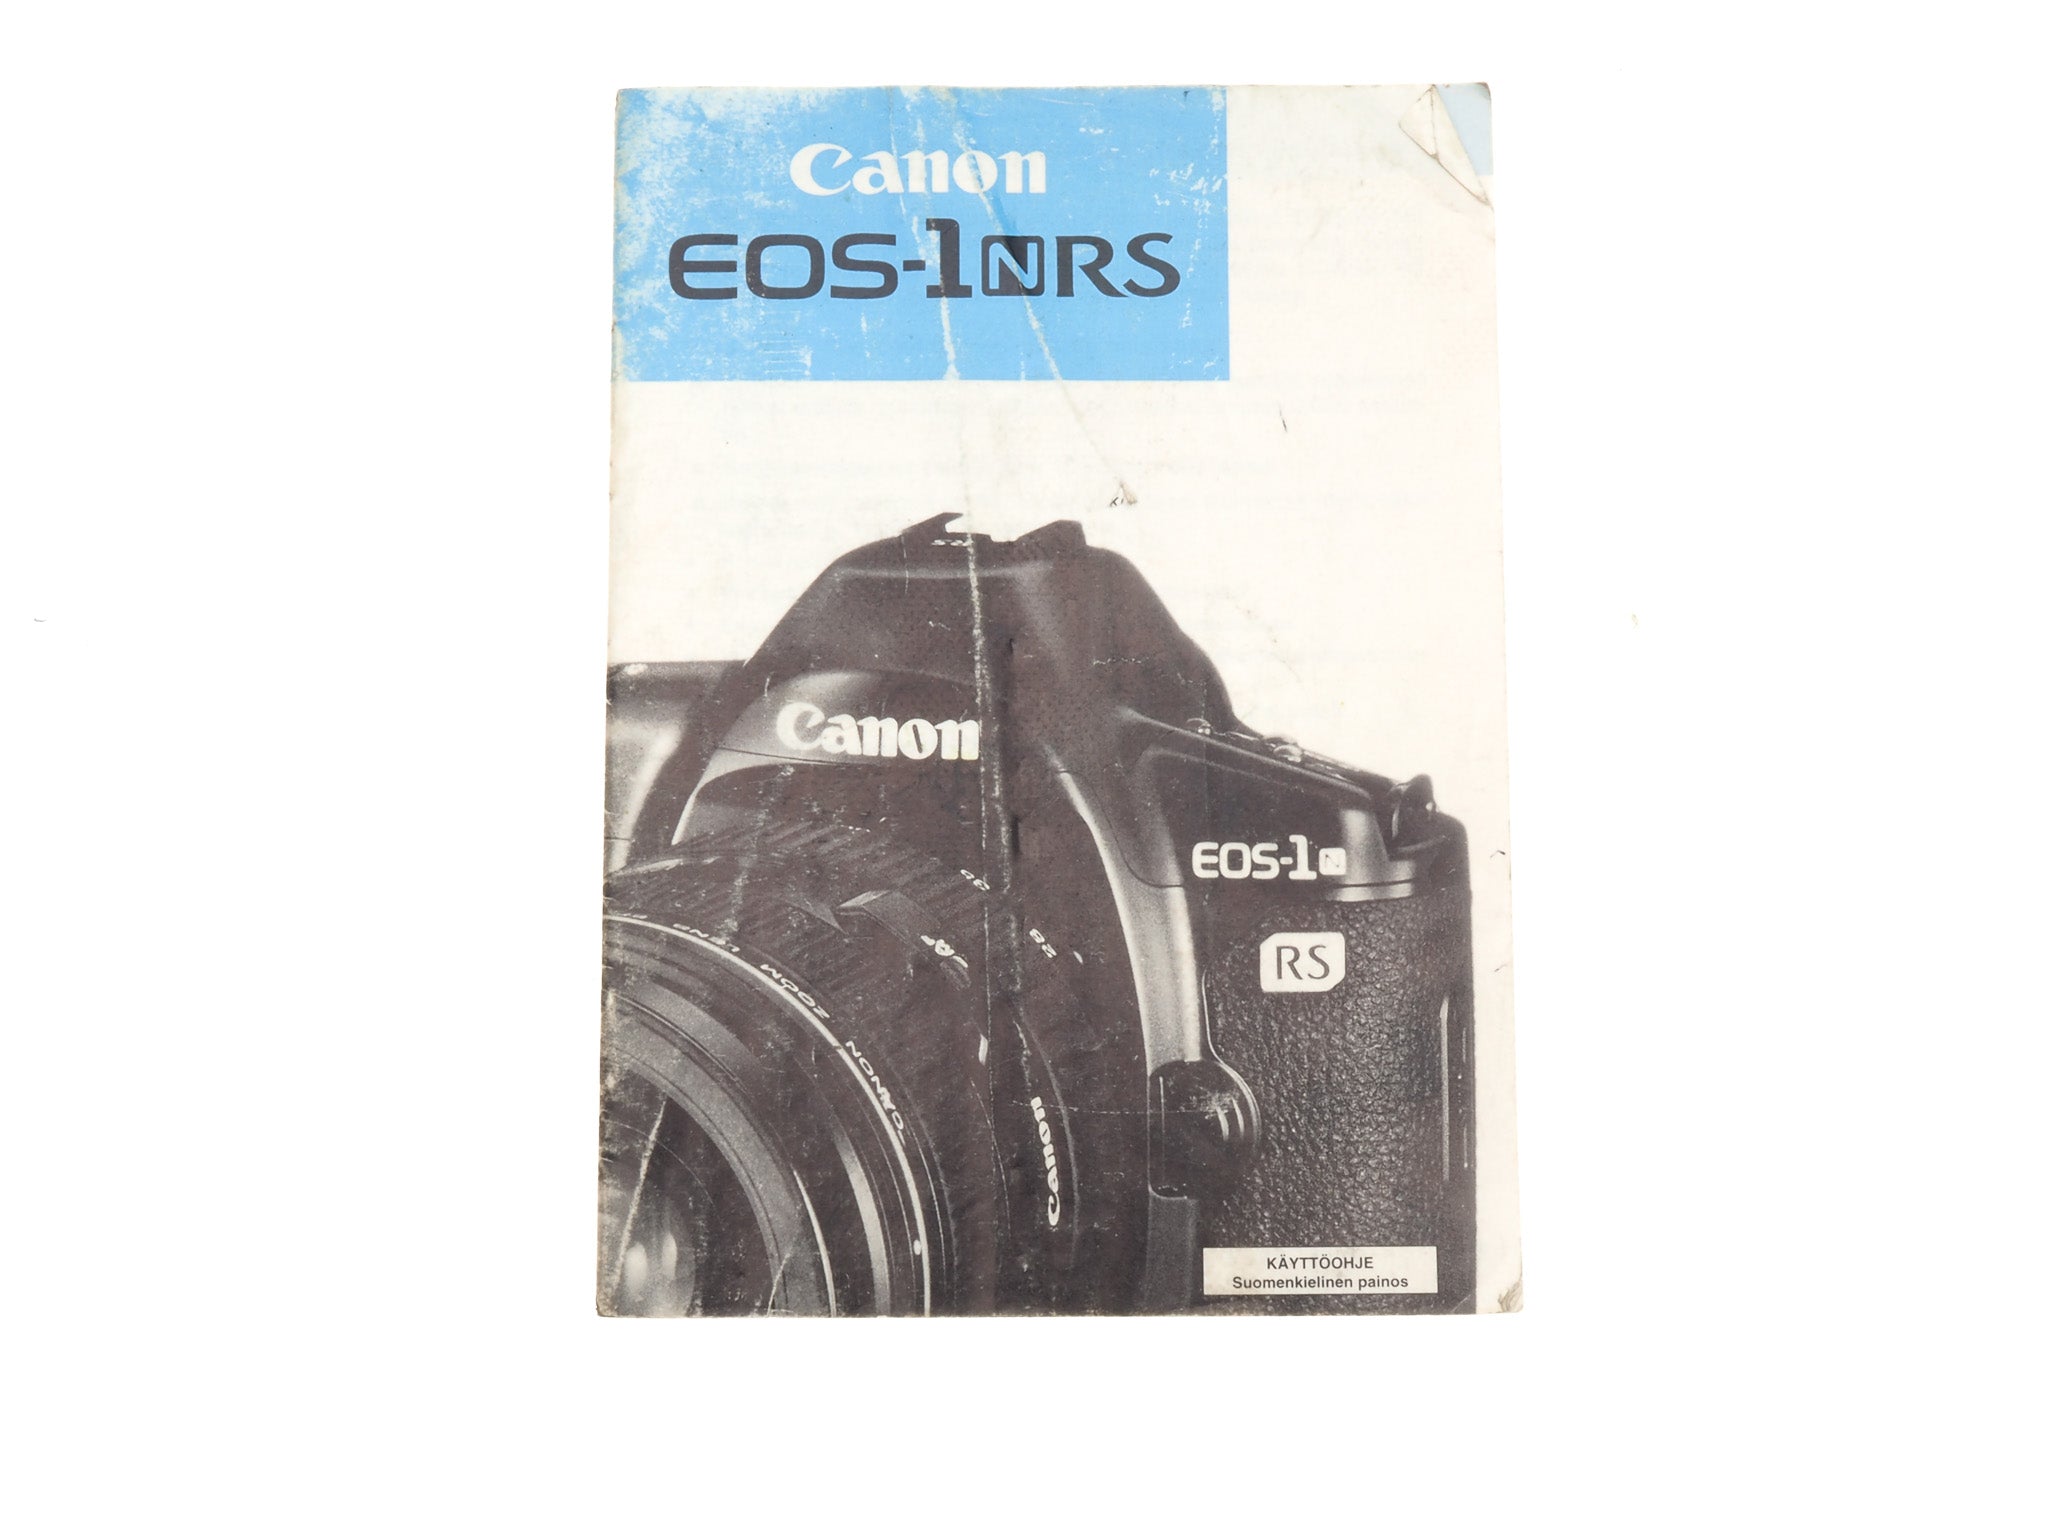 Canon EOS-1NRS Instructions - Accessory